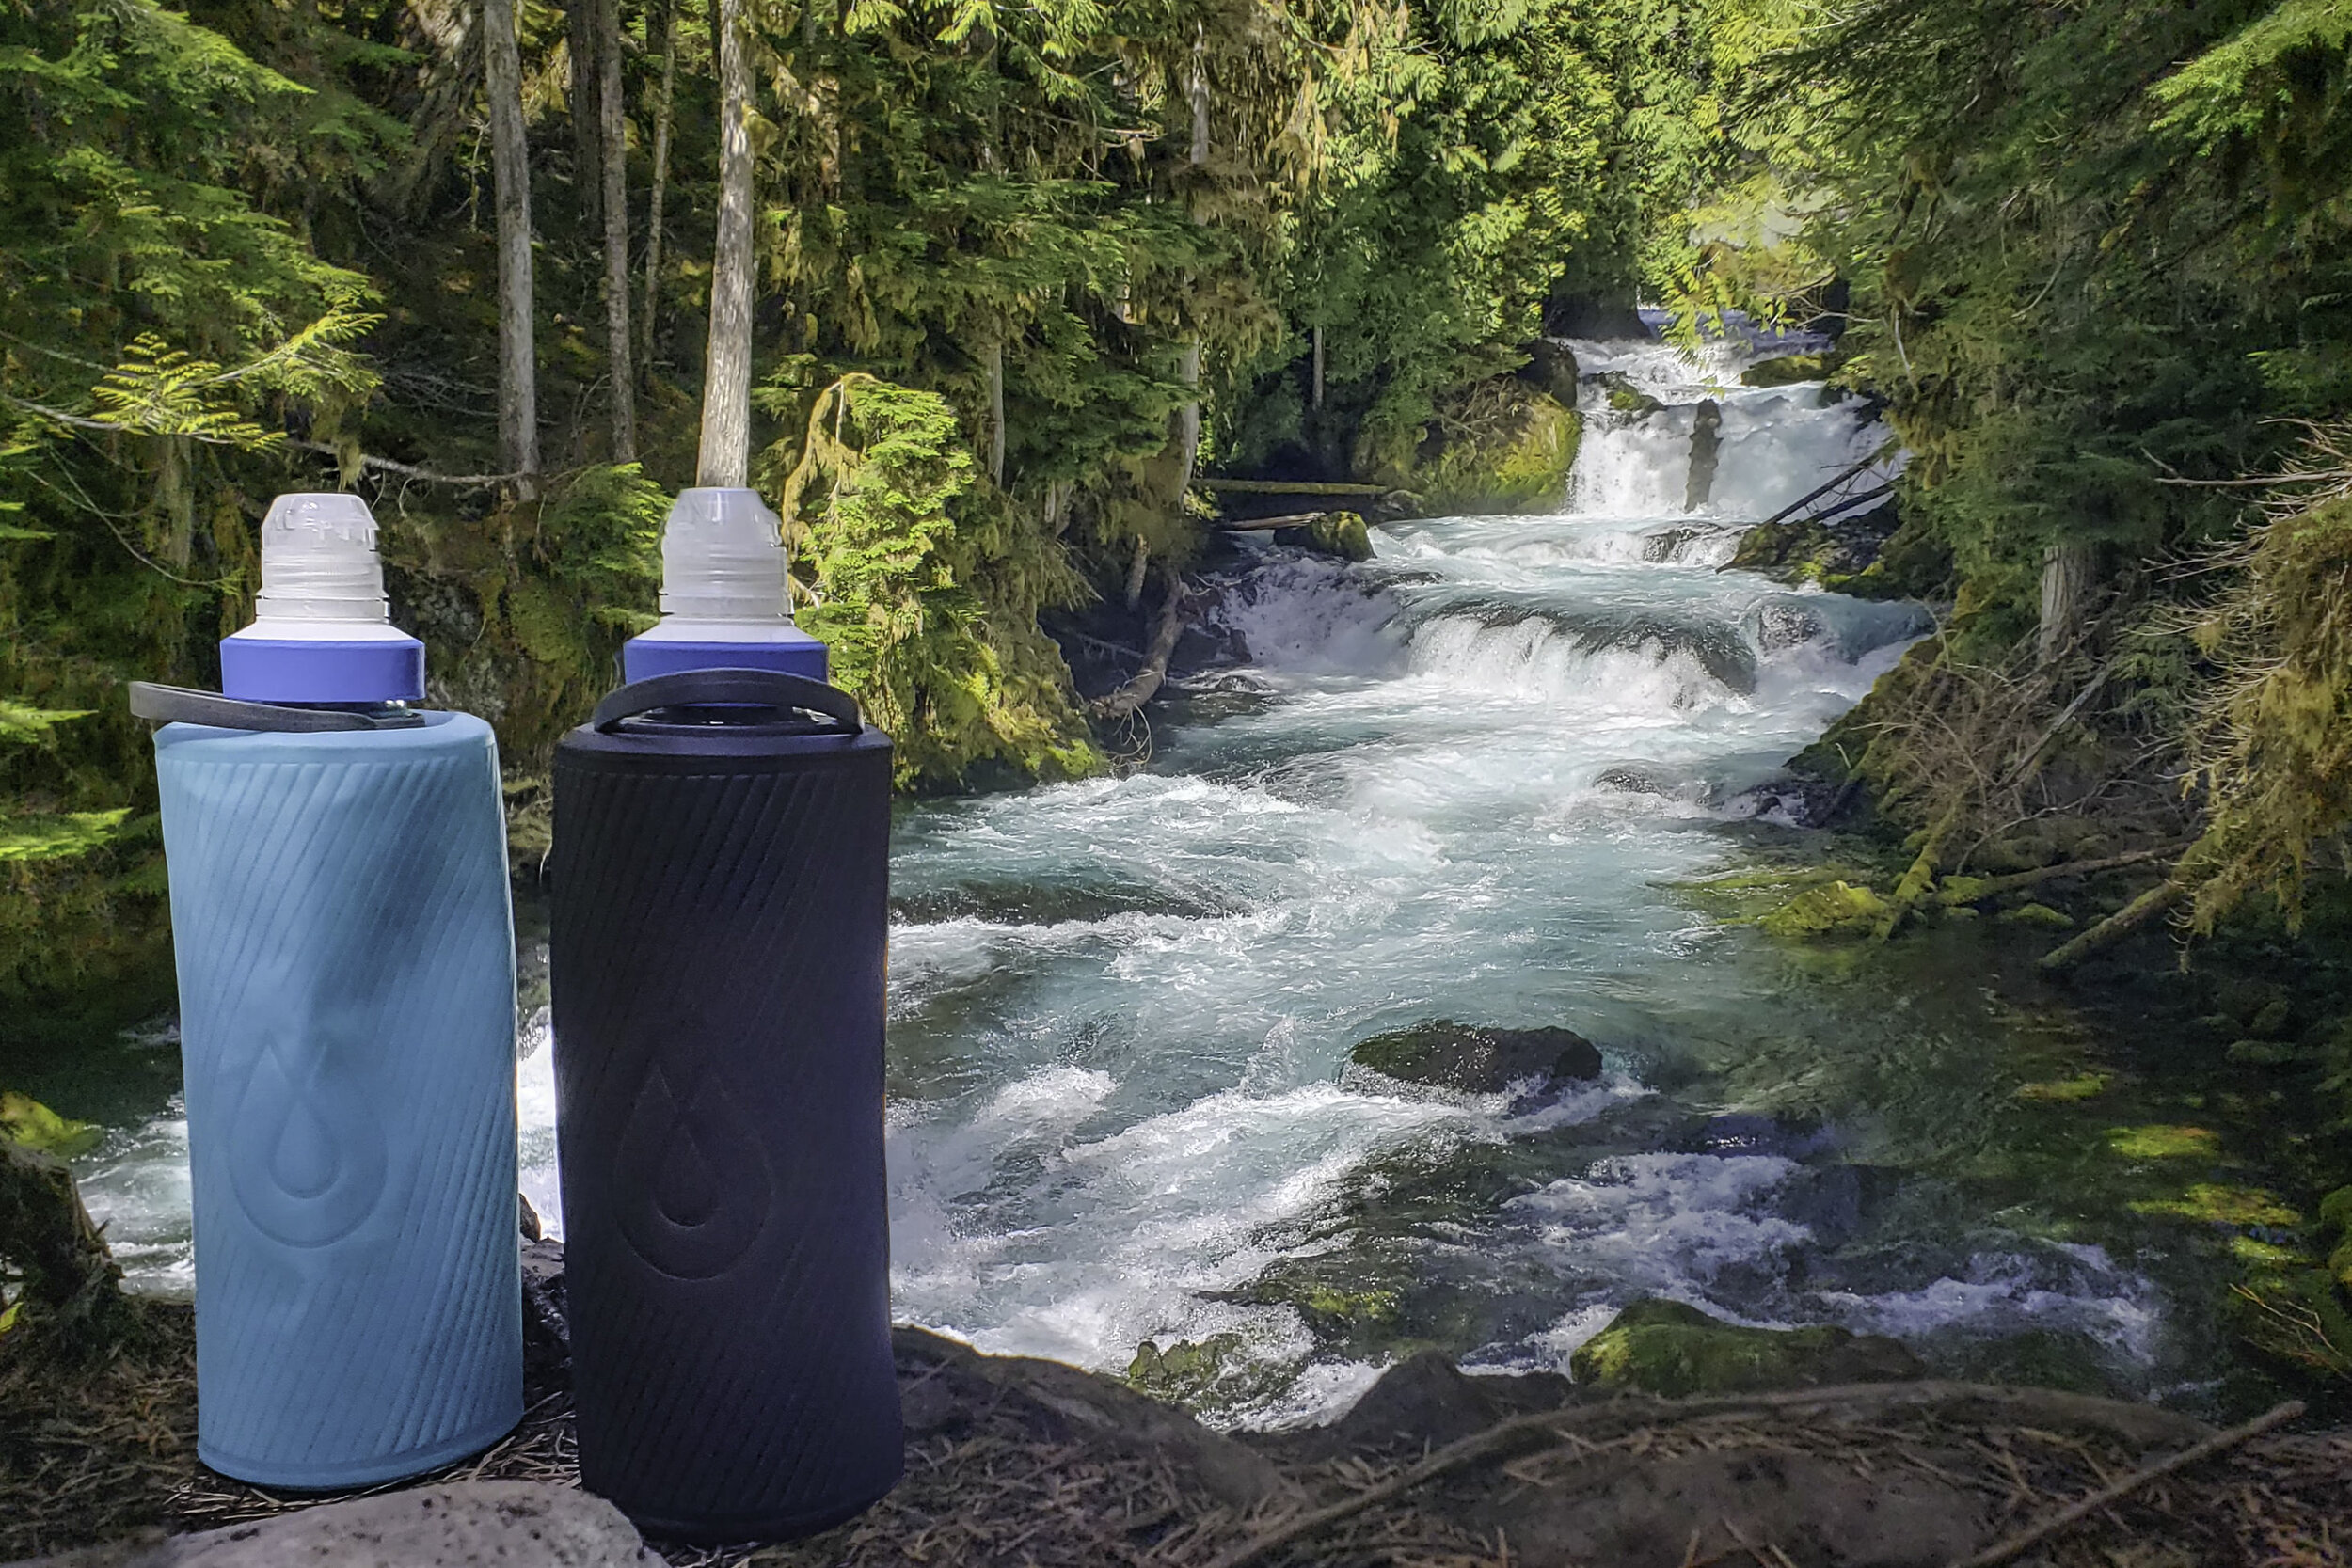 We love pairing the Hydrapak Flux with the Katadyn BeFree water filter for ultralight backpacking.